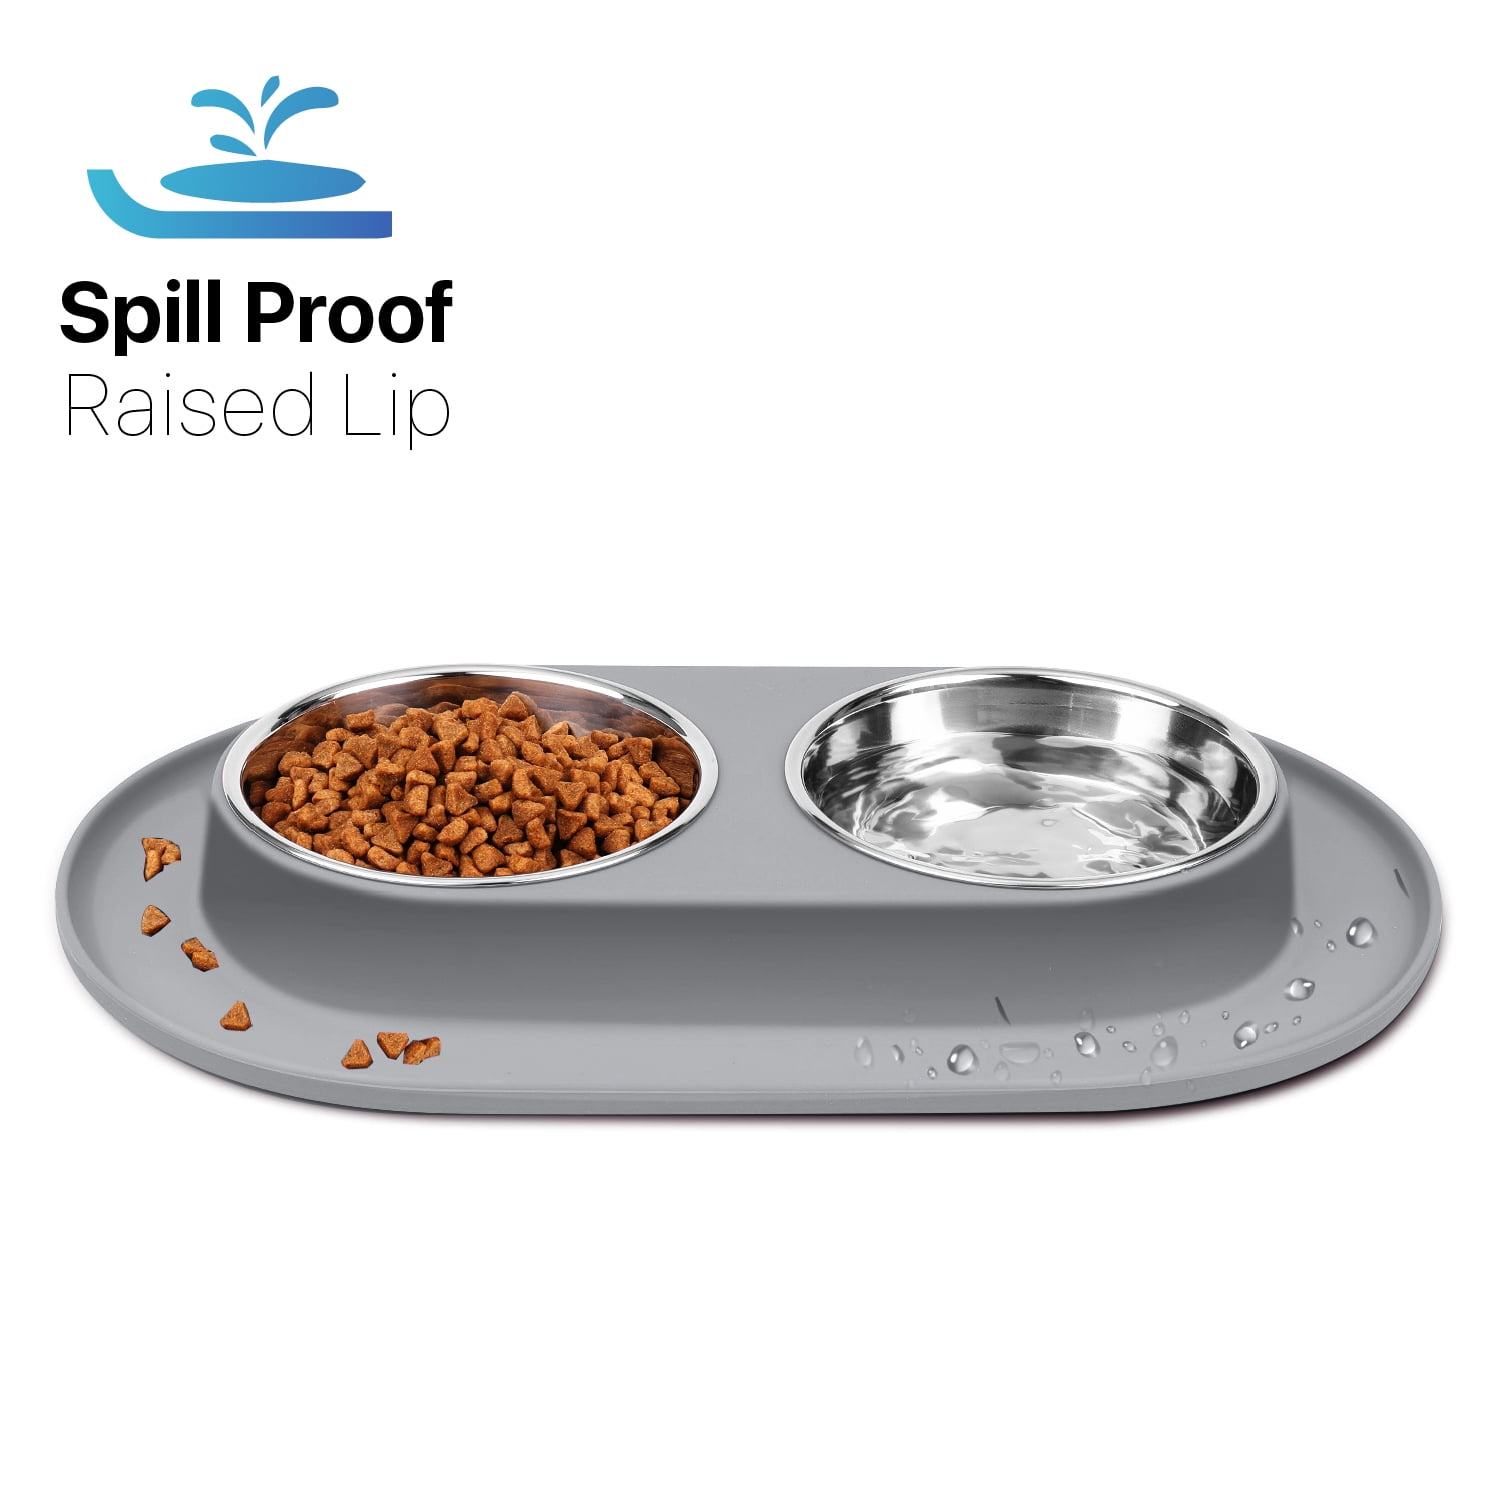 Stainless Steel Double Bowl Dogcat Feeding Station Food Water Solution ▻   ▻ Free Shipping ▻ Up to 70% OFF